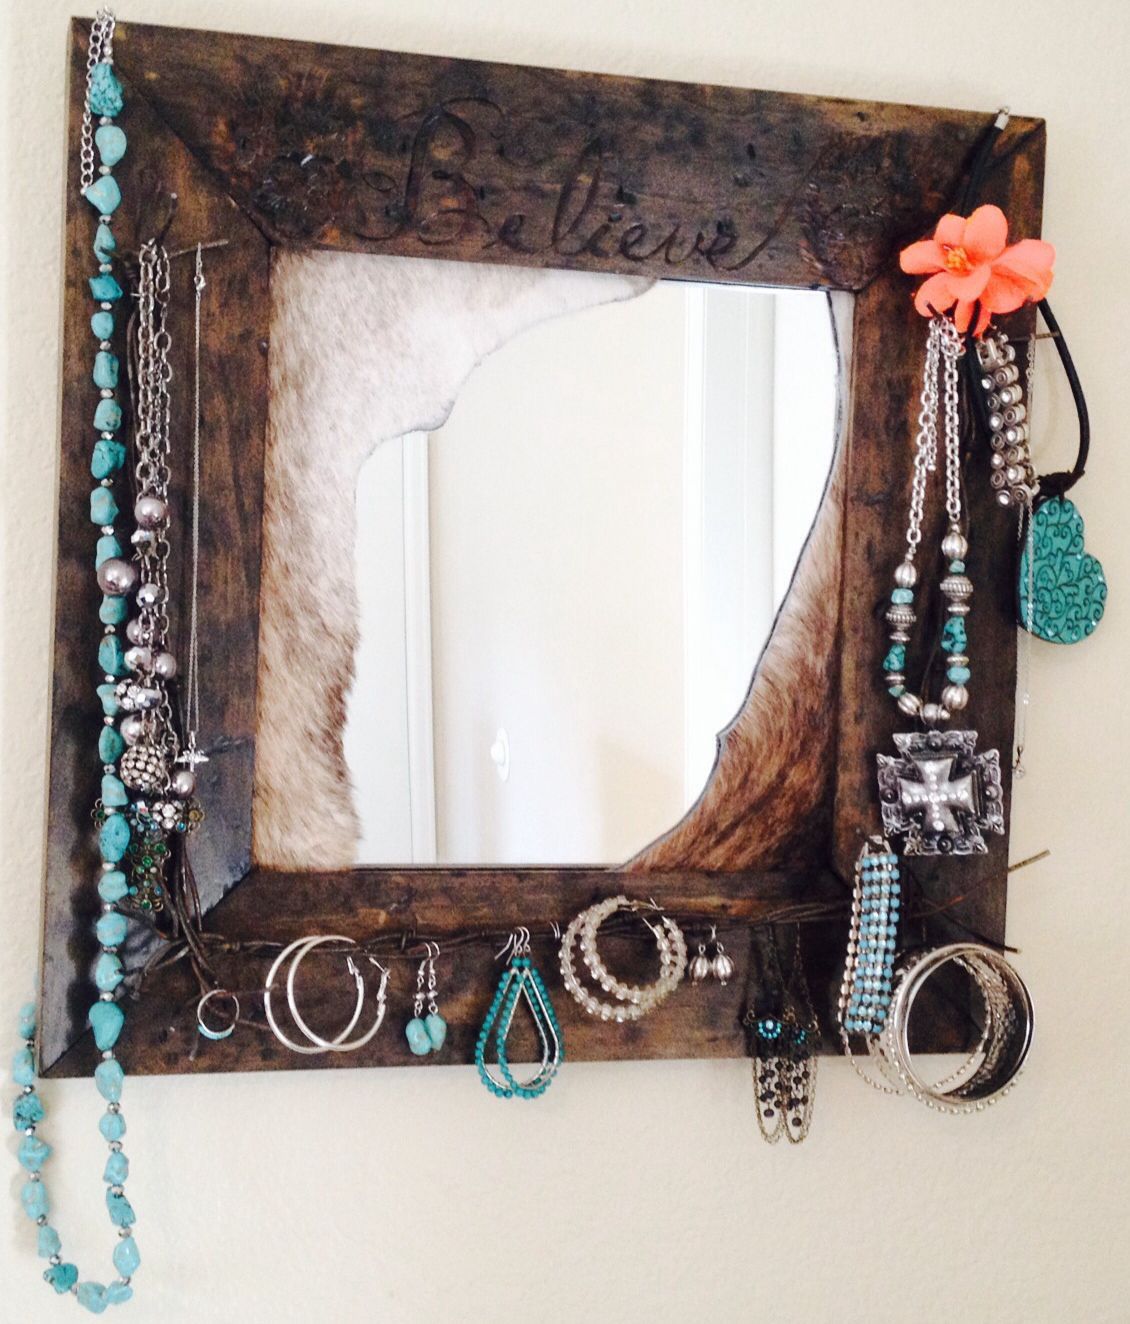 Beautiful "Believe" Mirror With Jewelry Hanging On It | Jewelry Mirror Throughout Western Wall Mirrors (View 5 of 15)